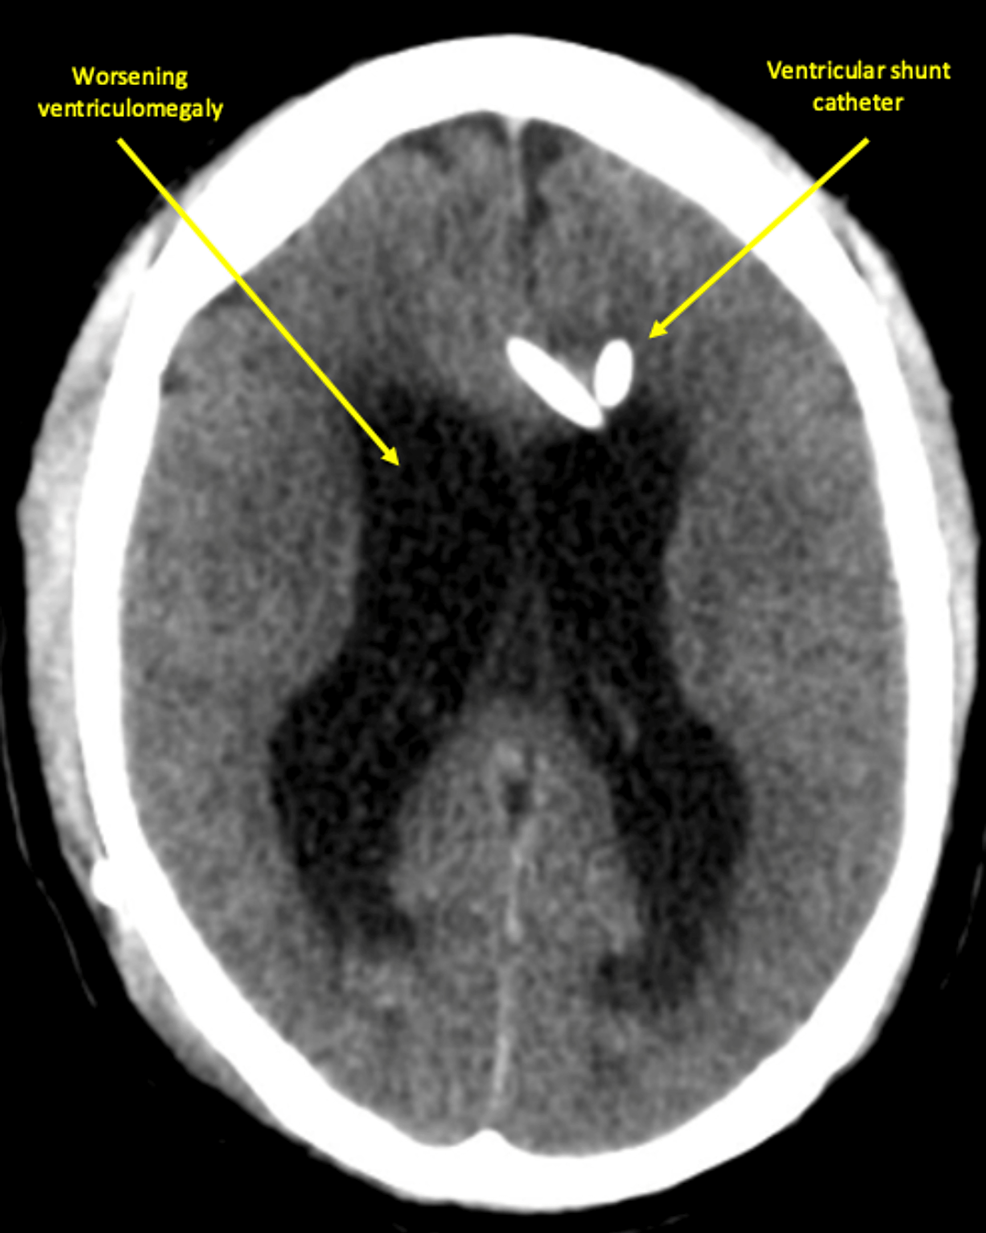 CT-head-without-contrast-on-the-first-day-of-readmission-displayed-ventricular-shunt-catheter-with-new-intraparenchymal-hemorrhage-at-the-right-frontal-lobe-and-extra-axial-hemorrhage-anterior-to-the-left-frontal-lobe.-In-addition,-worsening-ventriculomegaly-concerning-for-worsening-hydrocephalus-was-also-seen.